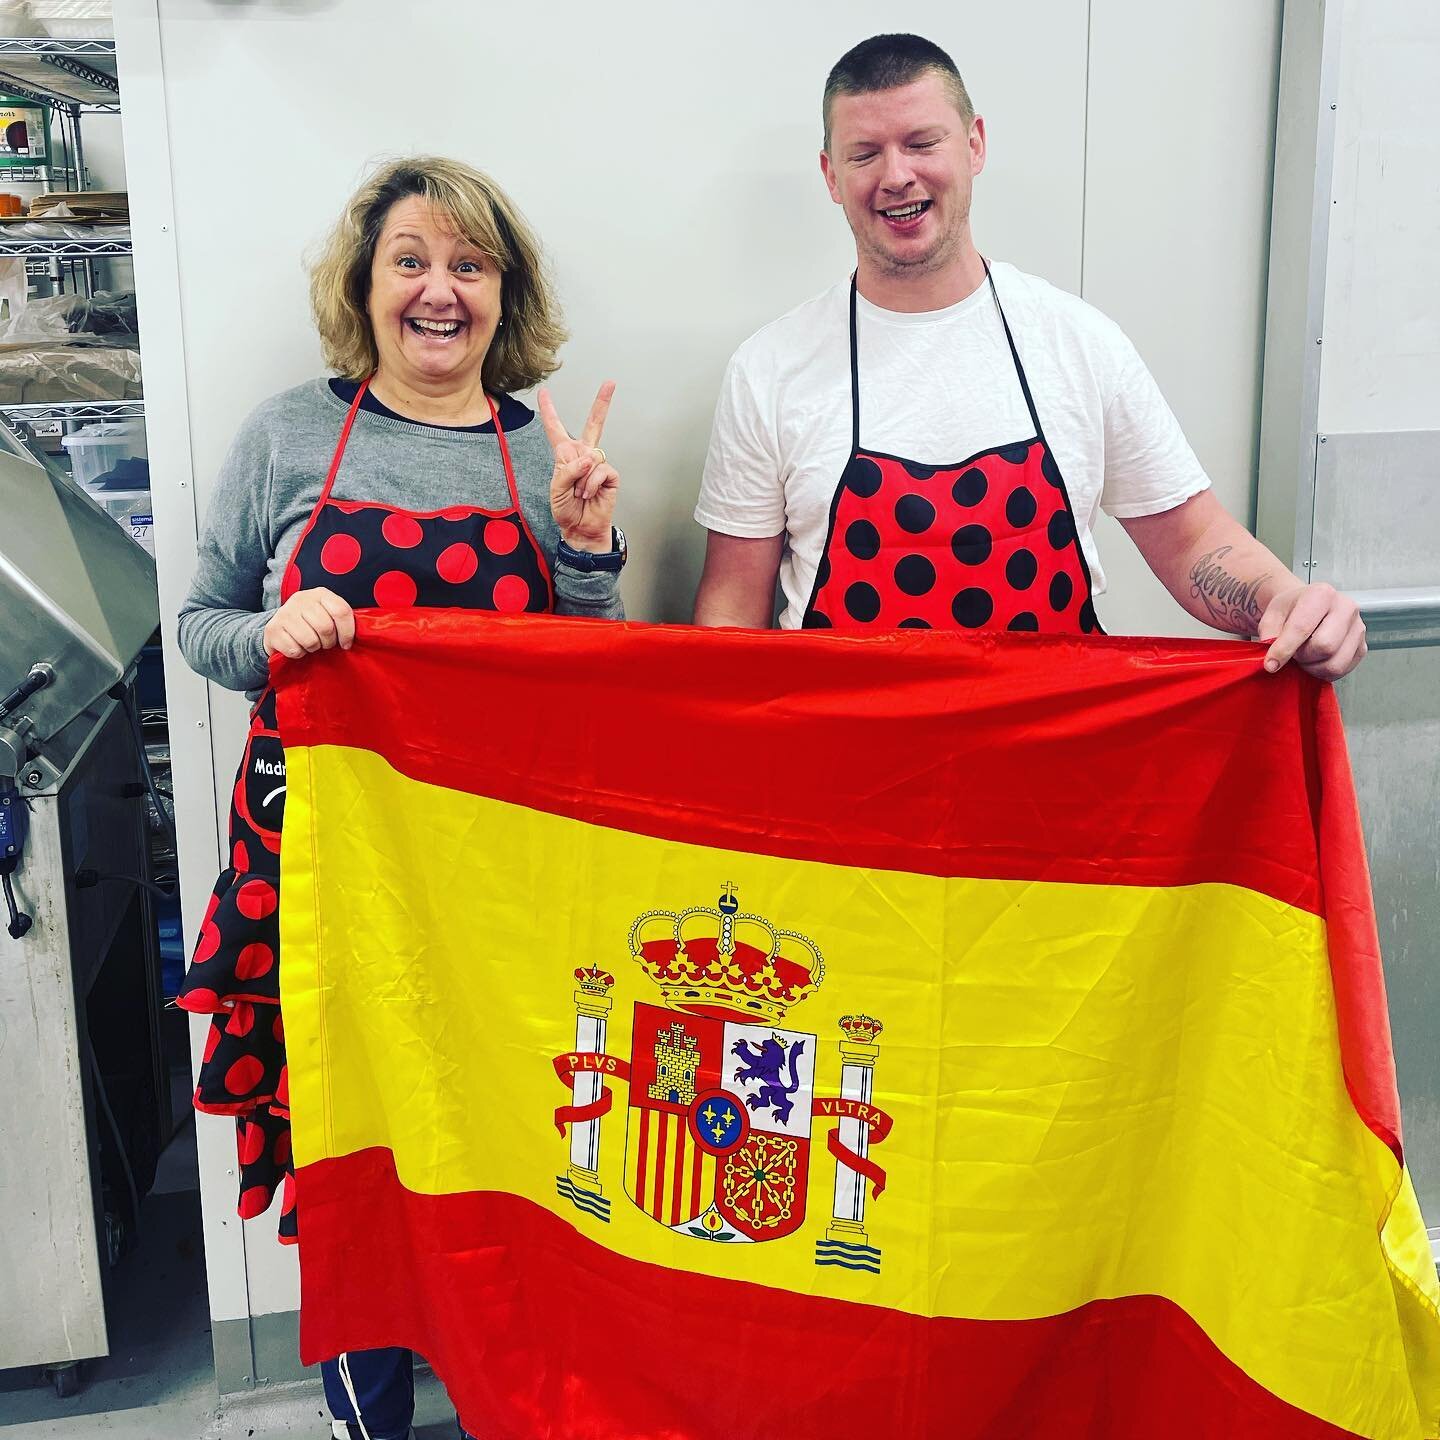 Our Spanish Supervisor, Maria was super happy with the FIFA Women's World Cup results on Sunday night 🏆⚽️

Our London born &amp; bred Head Chef Jamie&hellip;. Not so much 😂 Check him out in his cute Madrid apron! (To be worn all day as per their be